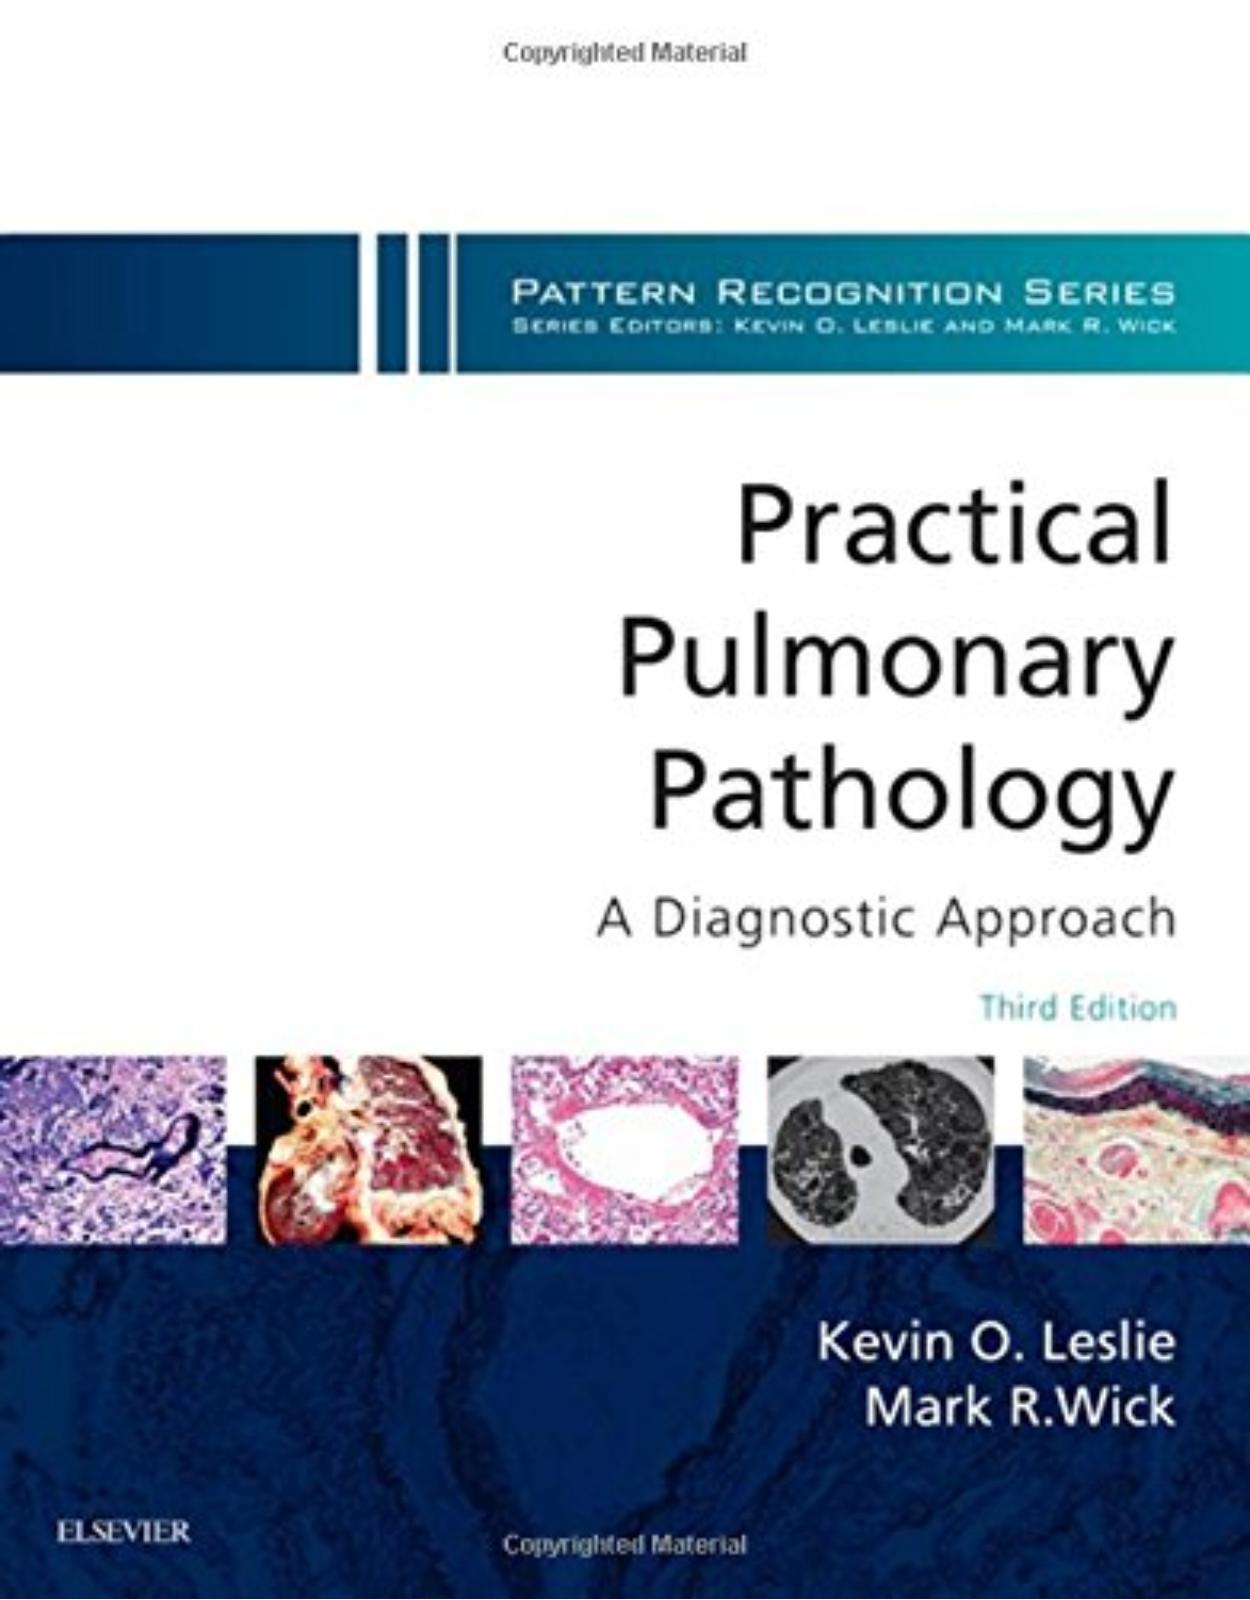 Practical Pulmonary Pathology: A Diagnostic Approach: A Volume in the Pattern Recognition Series, 3e 